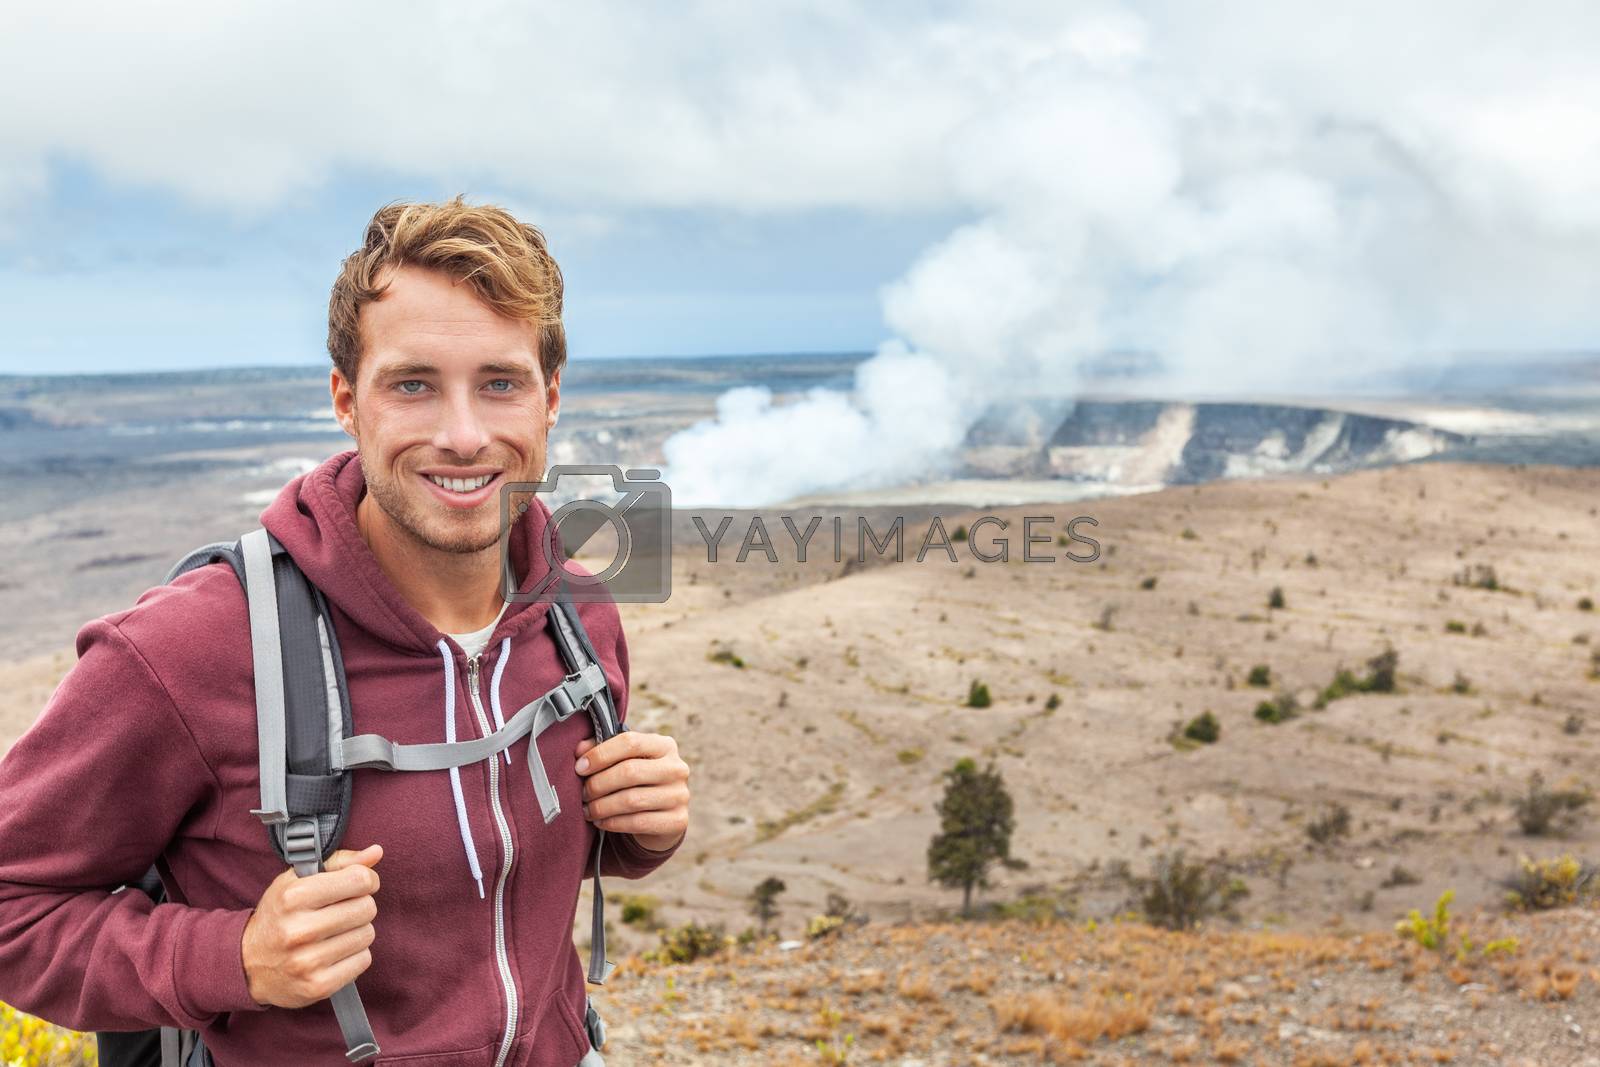 Royalty free image of Hawaii volcano tourist man at Halemaumau crater in Kilauea caldera in Hawaii Volcanoes National Park, big Island with volcanic clouds and ash from eruption. by Maridav